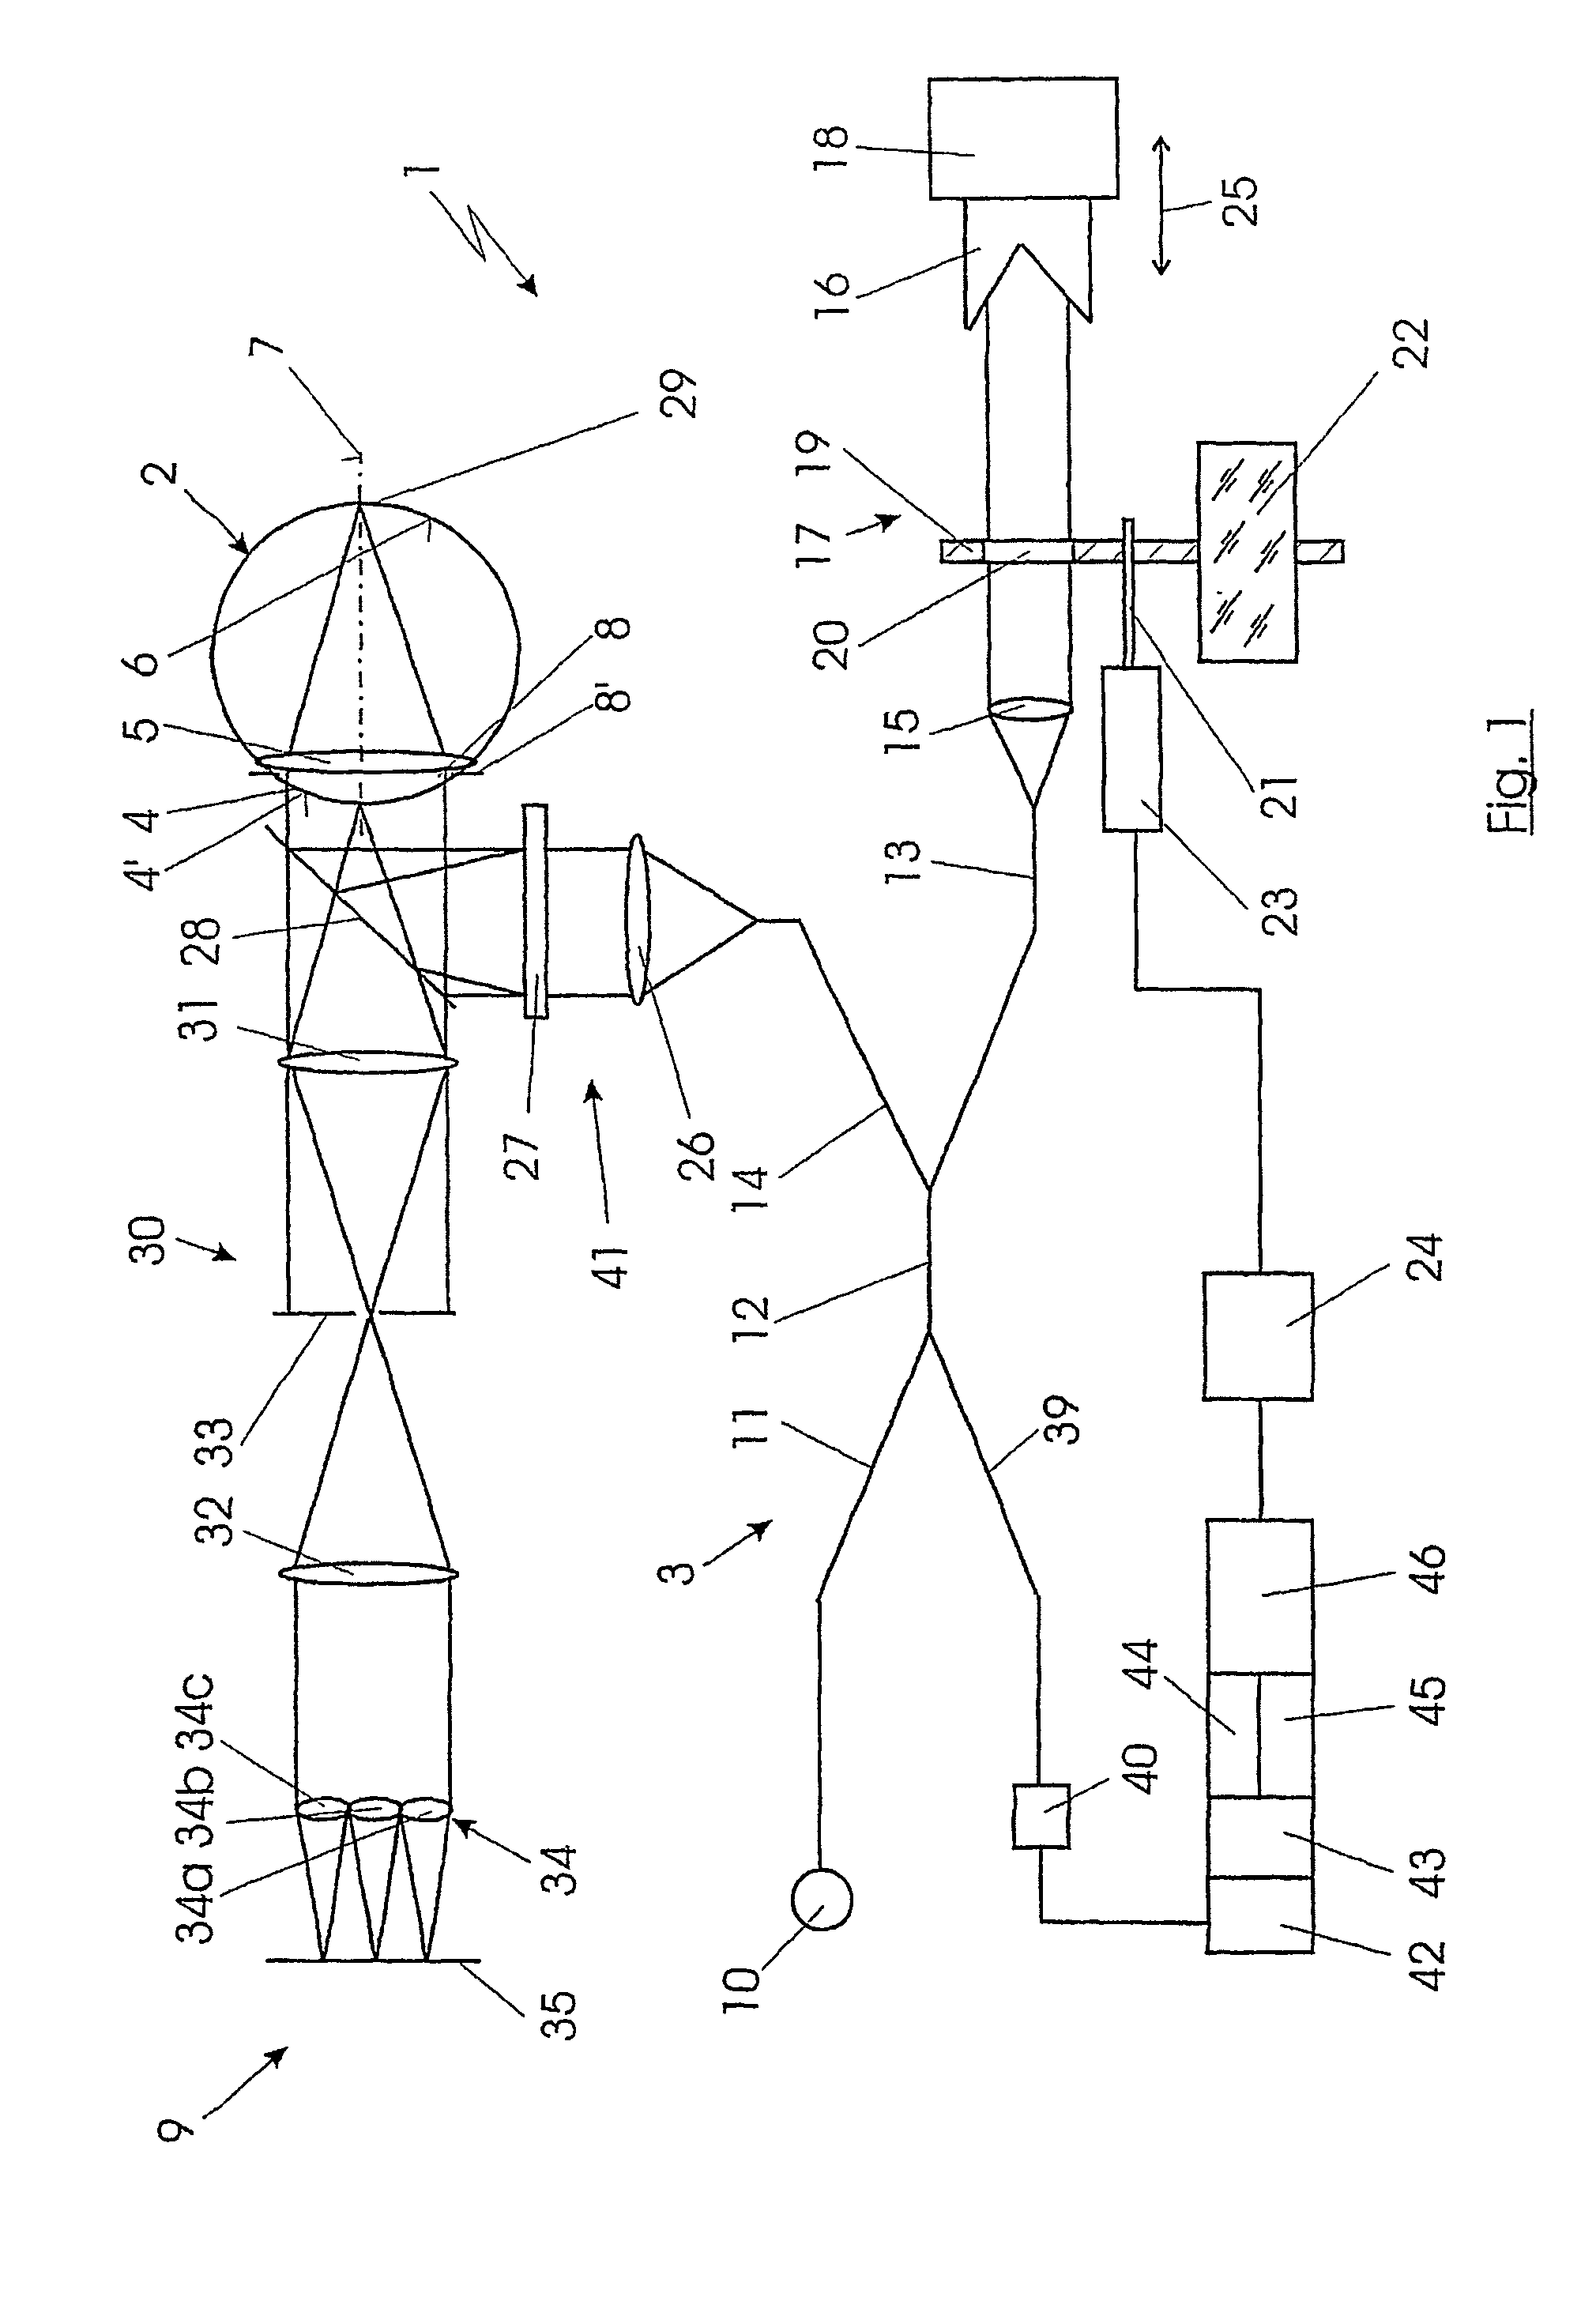 System for measuring the optical image quality of an eye in a contactless manner